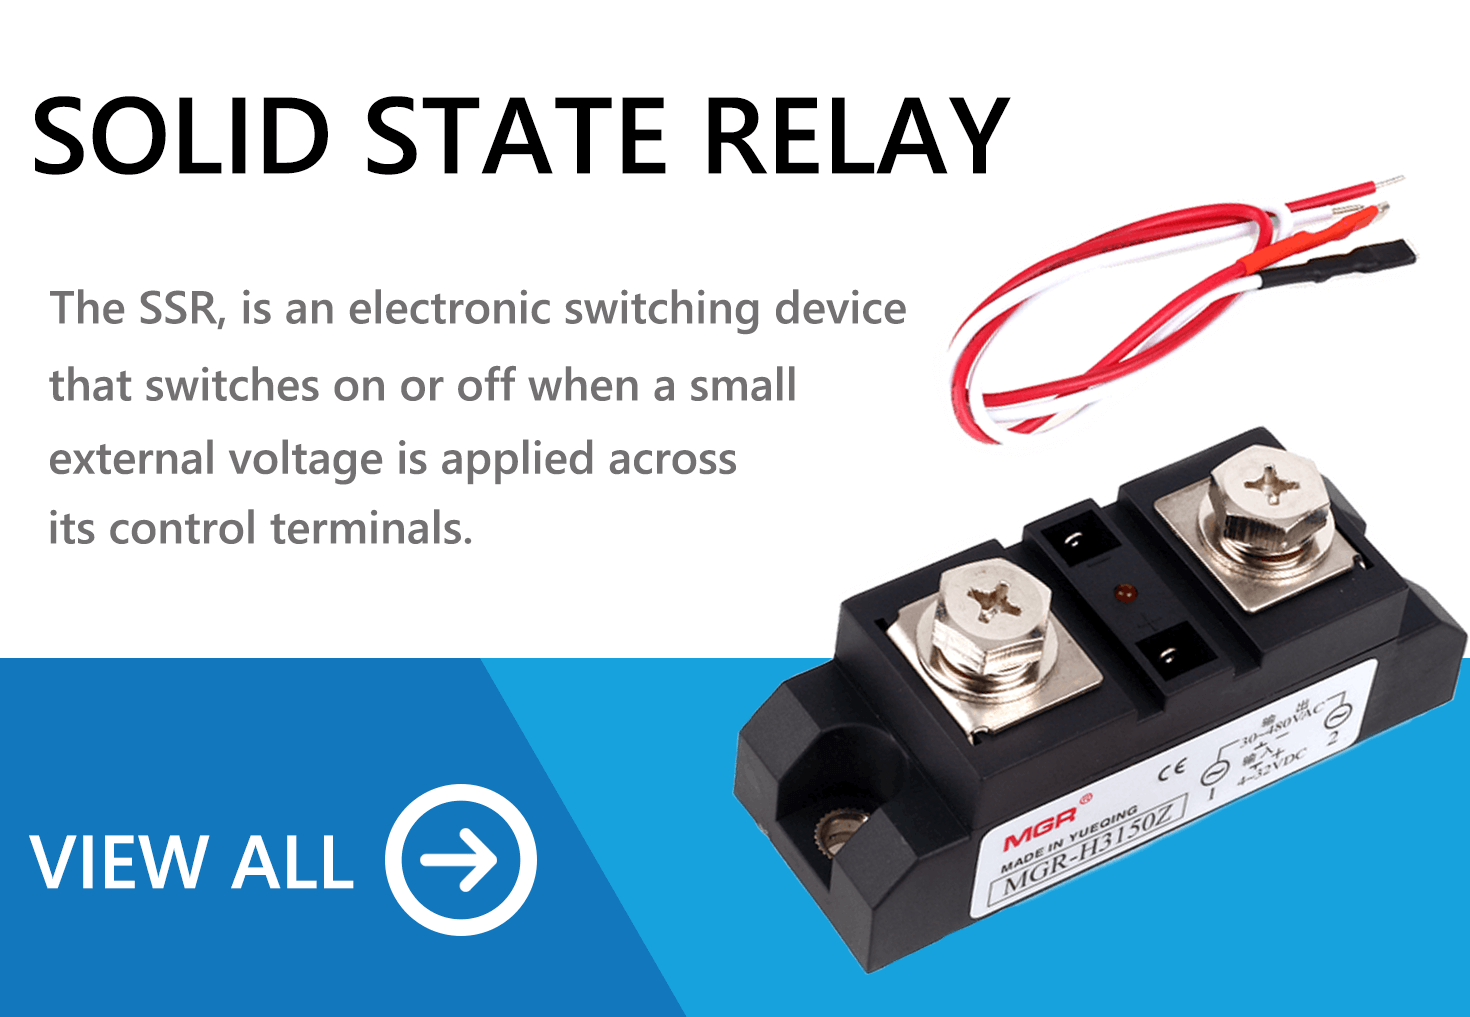 INDUSTRIAL SOLID STATE RELAY